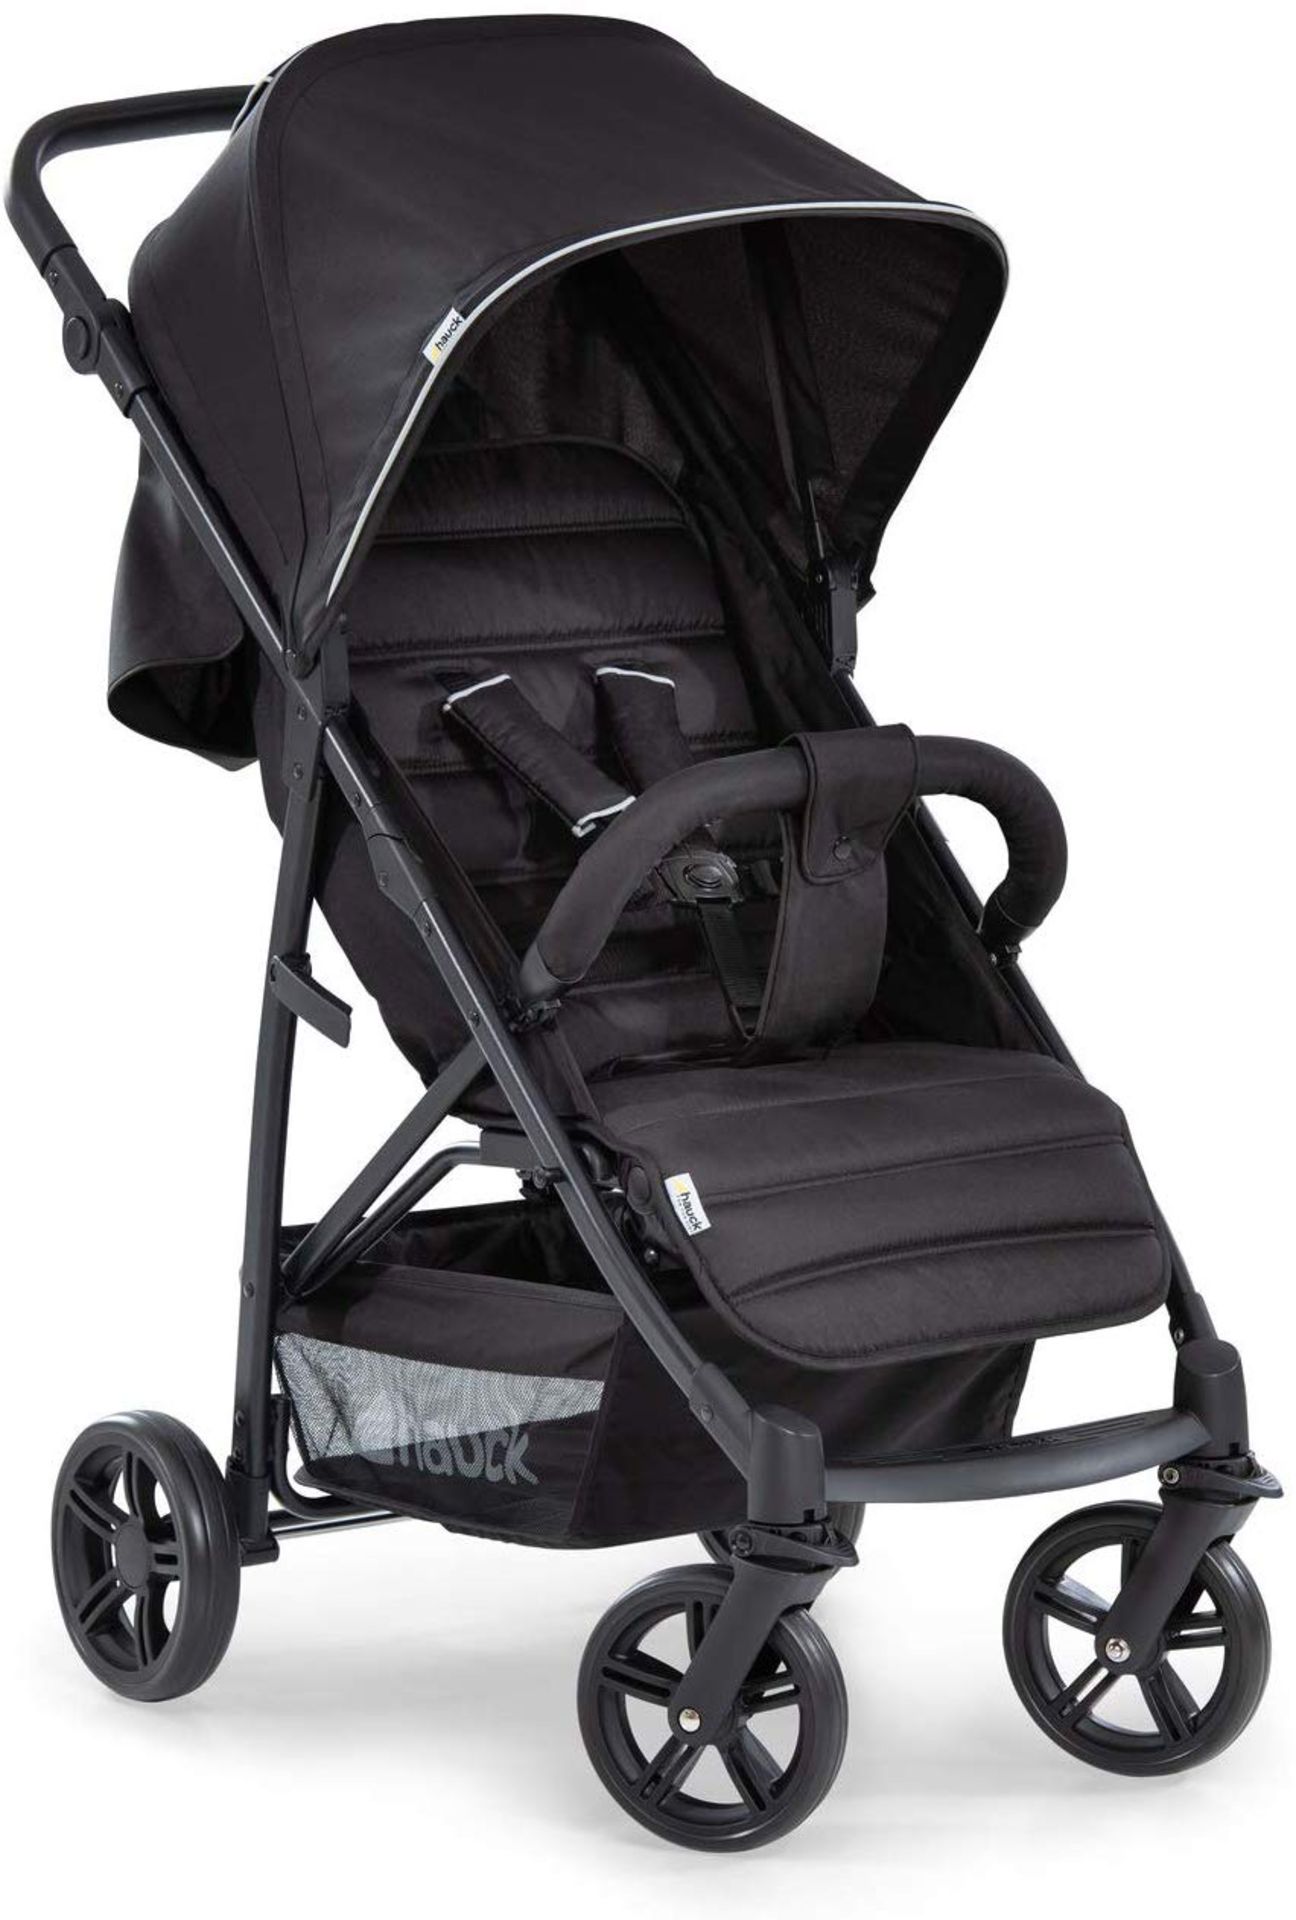 Hauck Rapid 4, Four Wheel Pushchair with One Hand Fold, Small Foldable, Buggy - Image 2 of 2